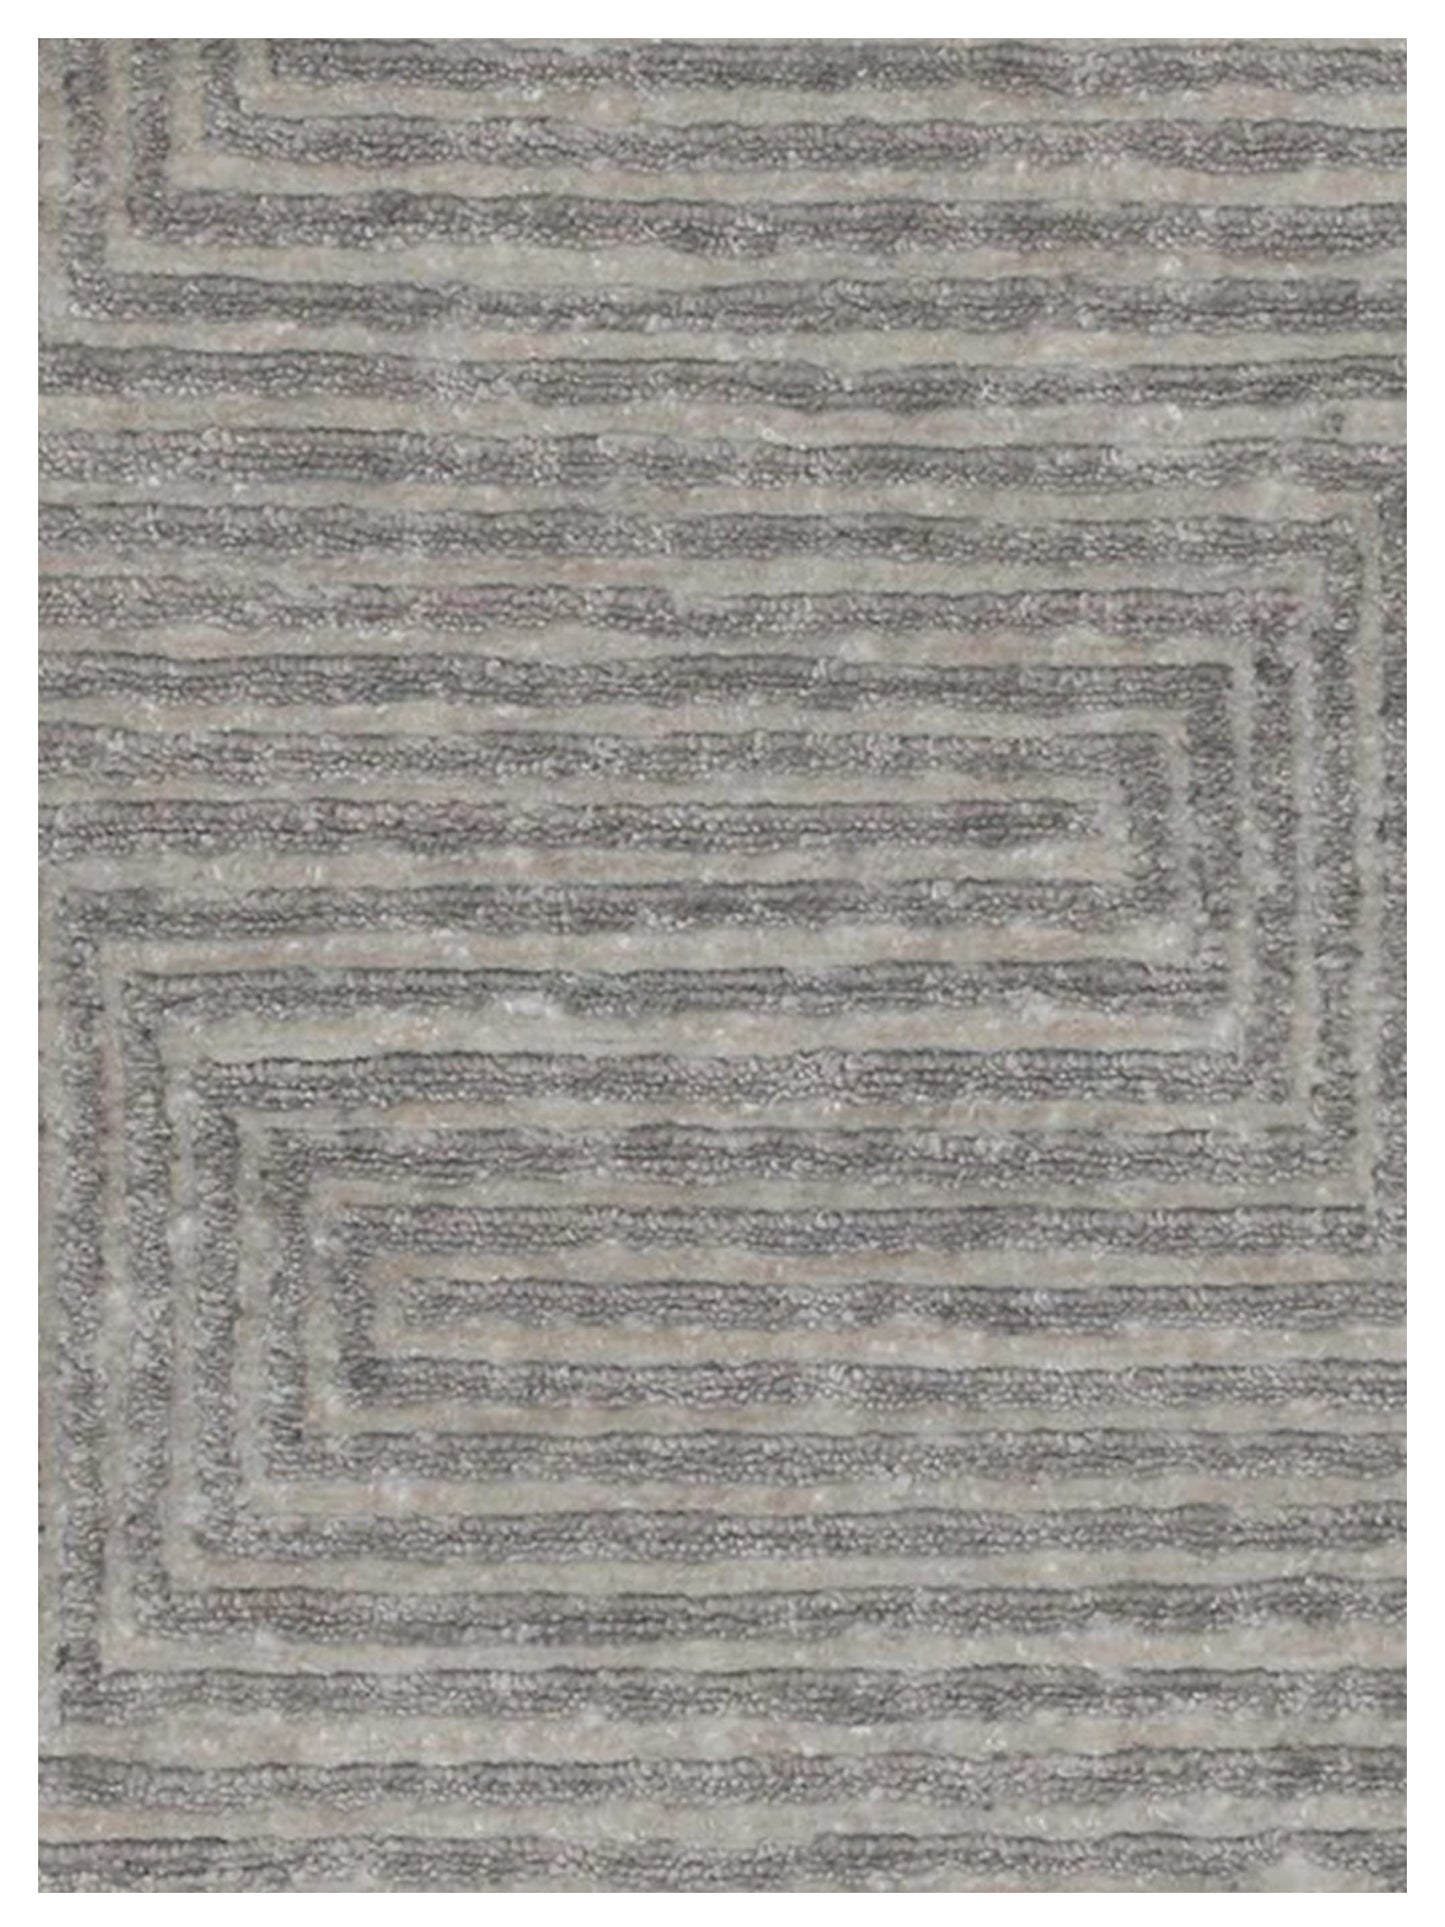 Artisan Mary  Wheat  Contemporary Knotted Rug